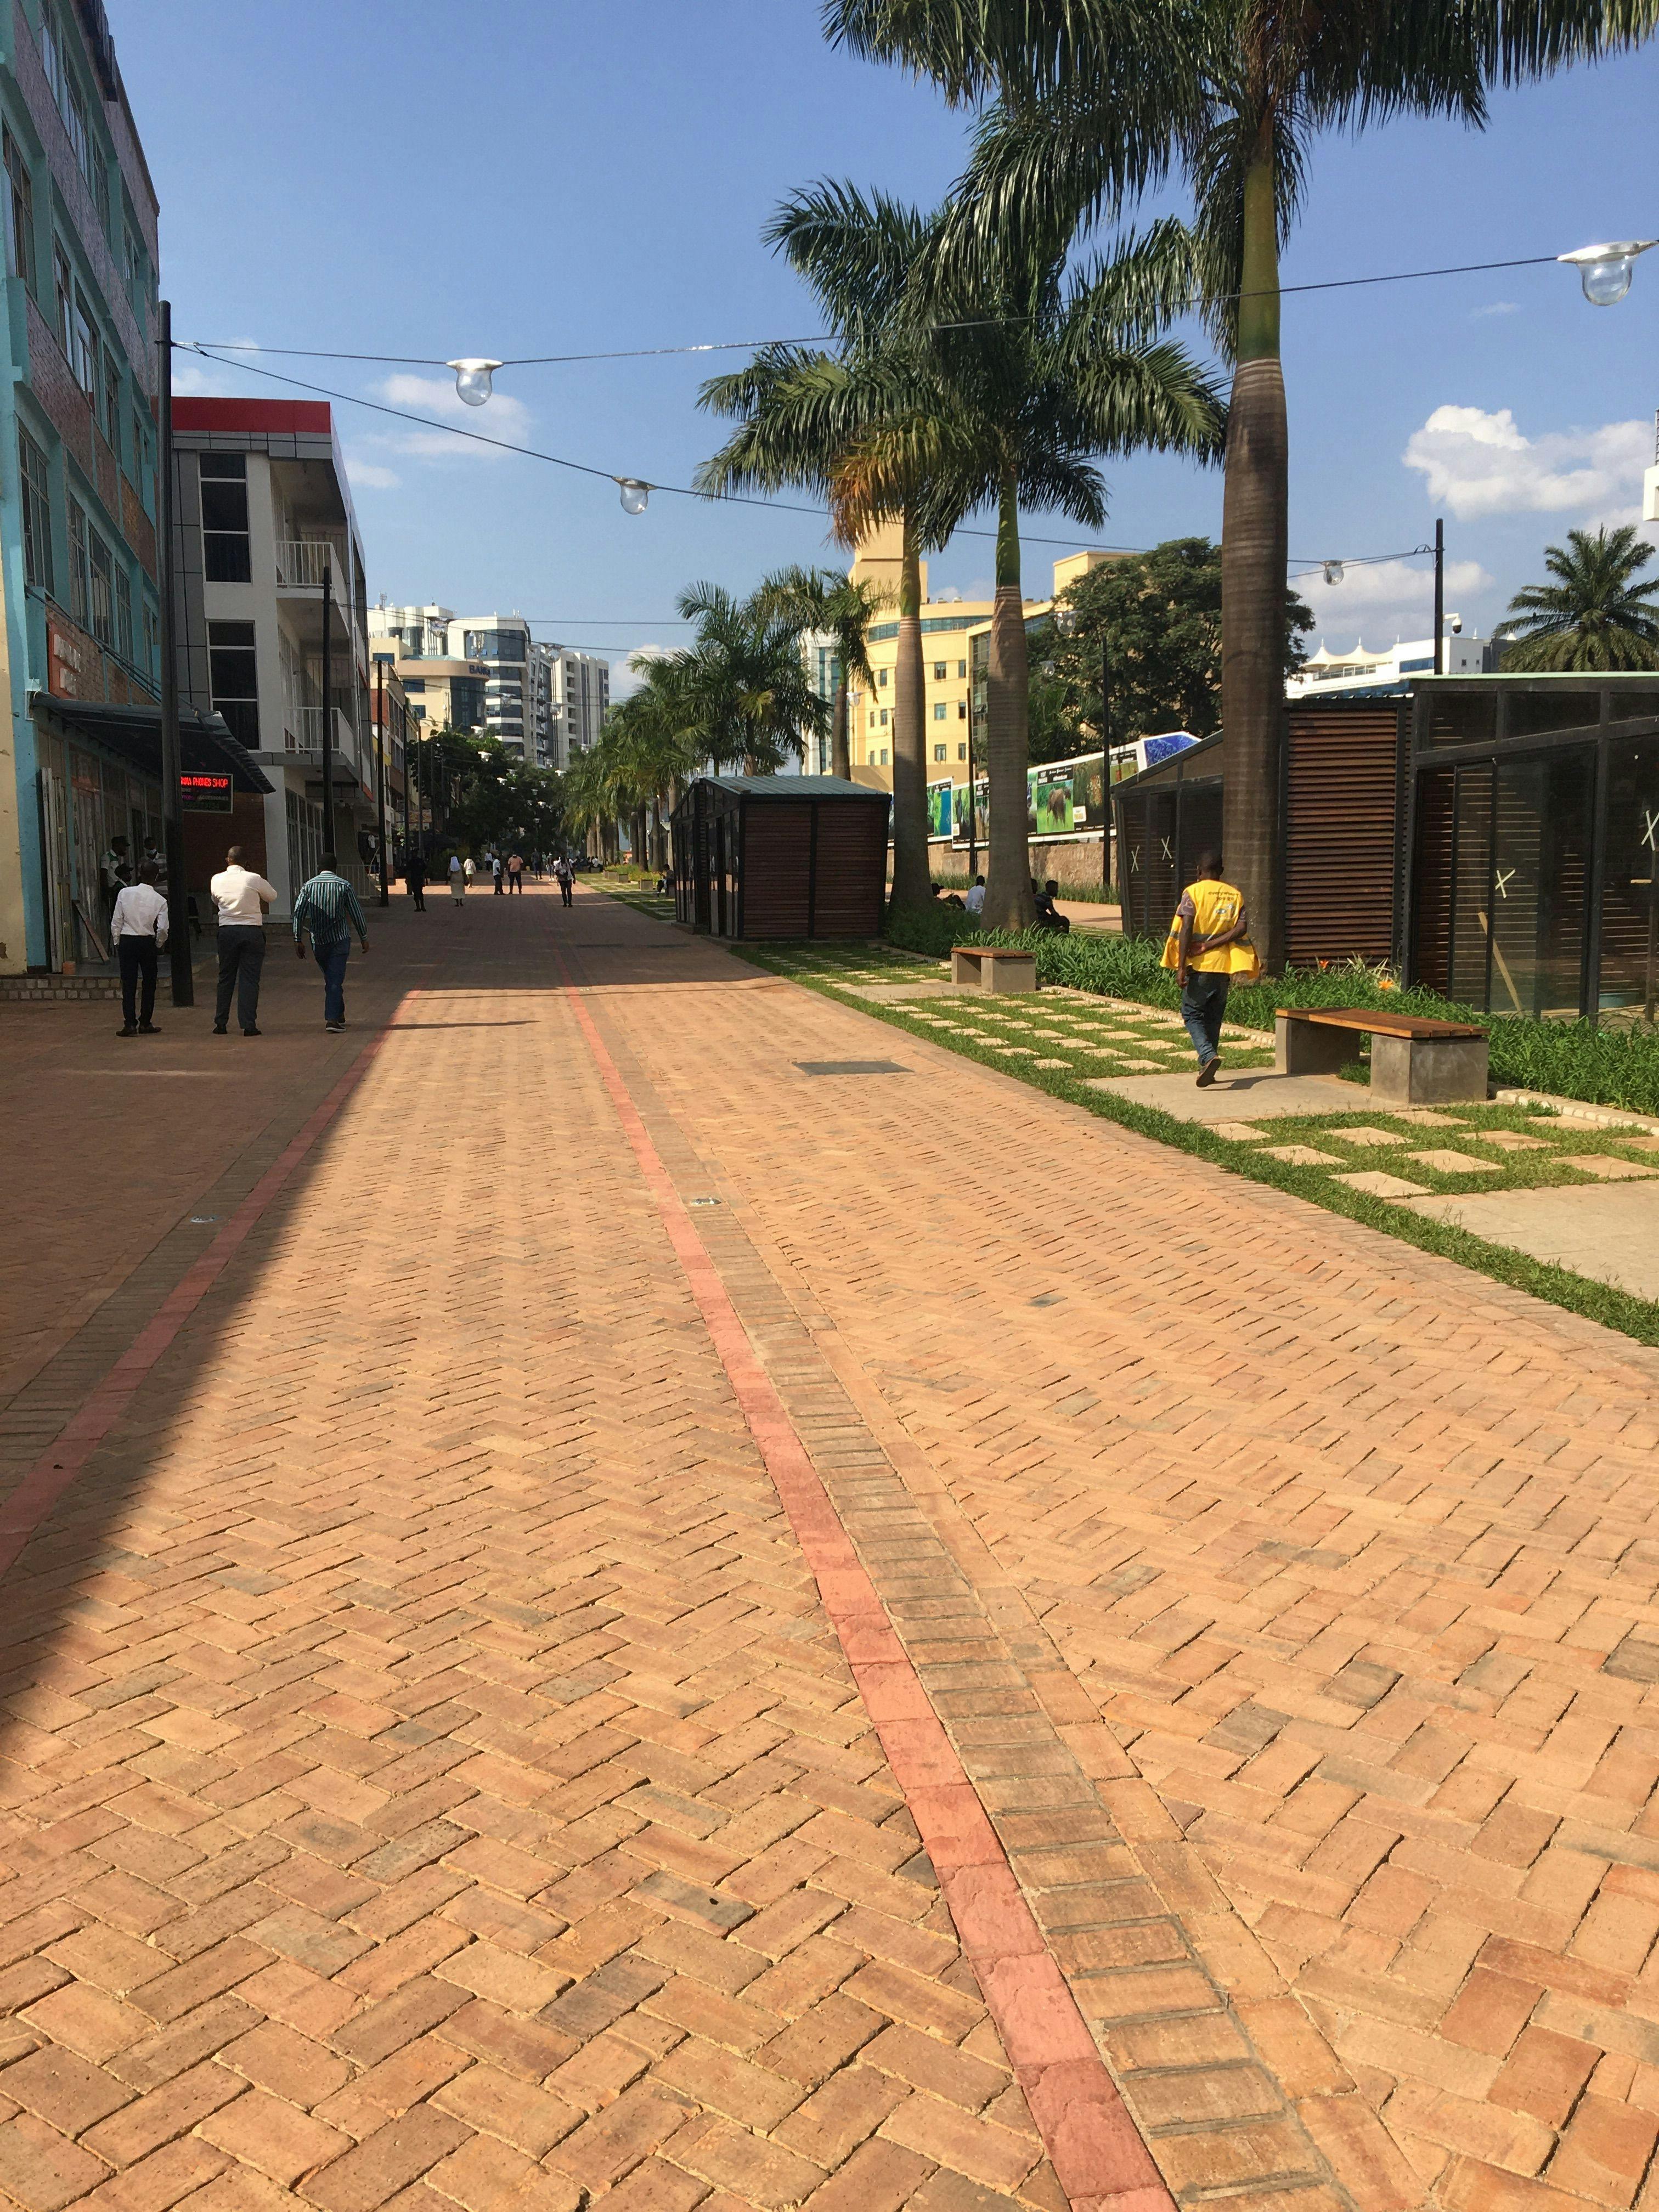 Walking in the newly completed car free zone in Kigali